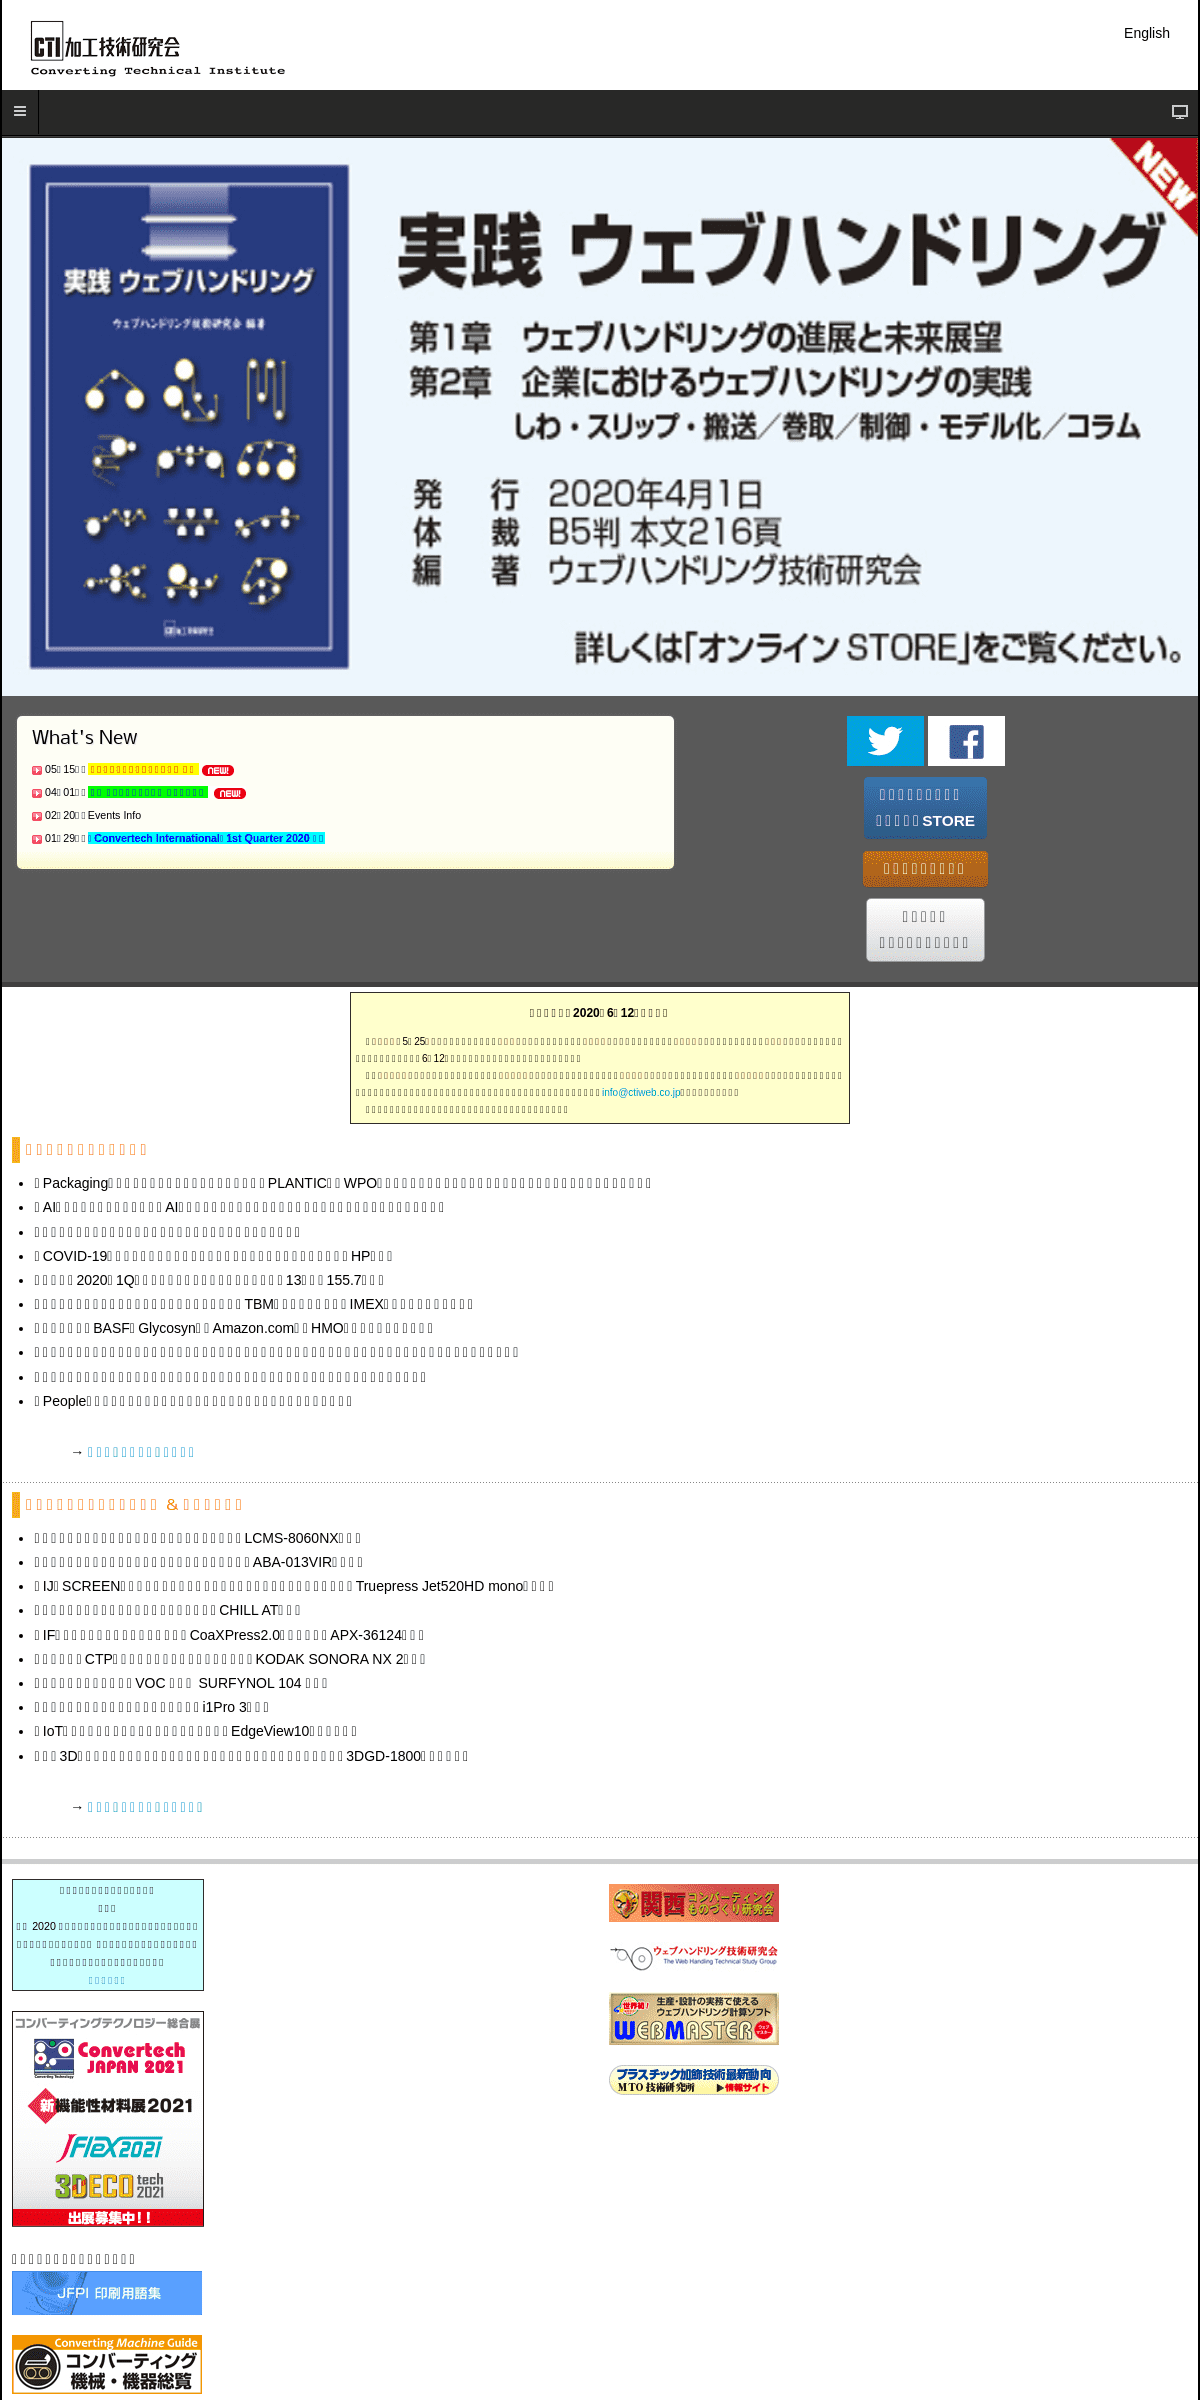 A complete backup of ctiweb.co.jp